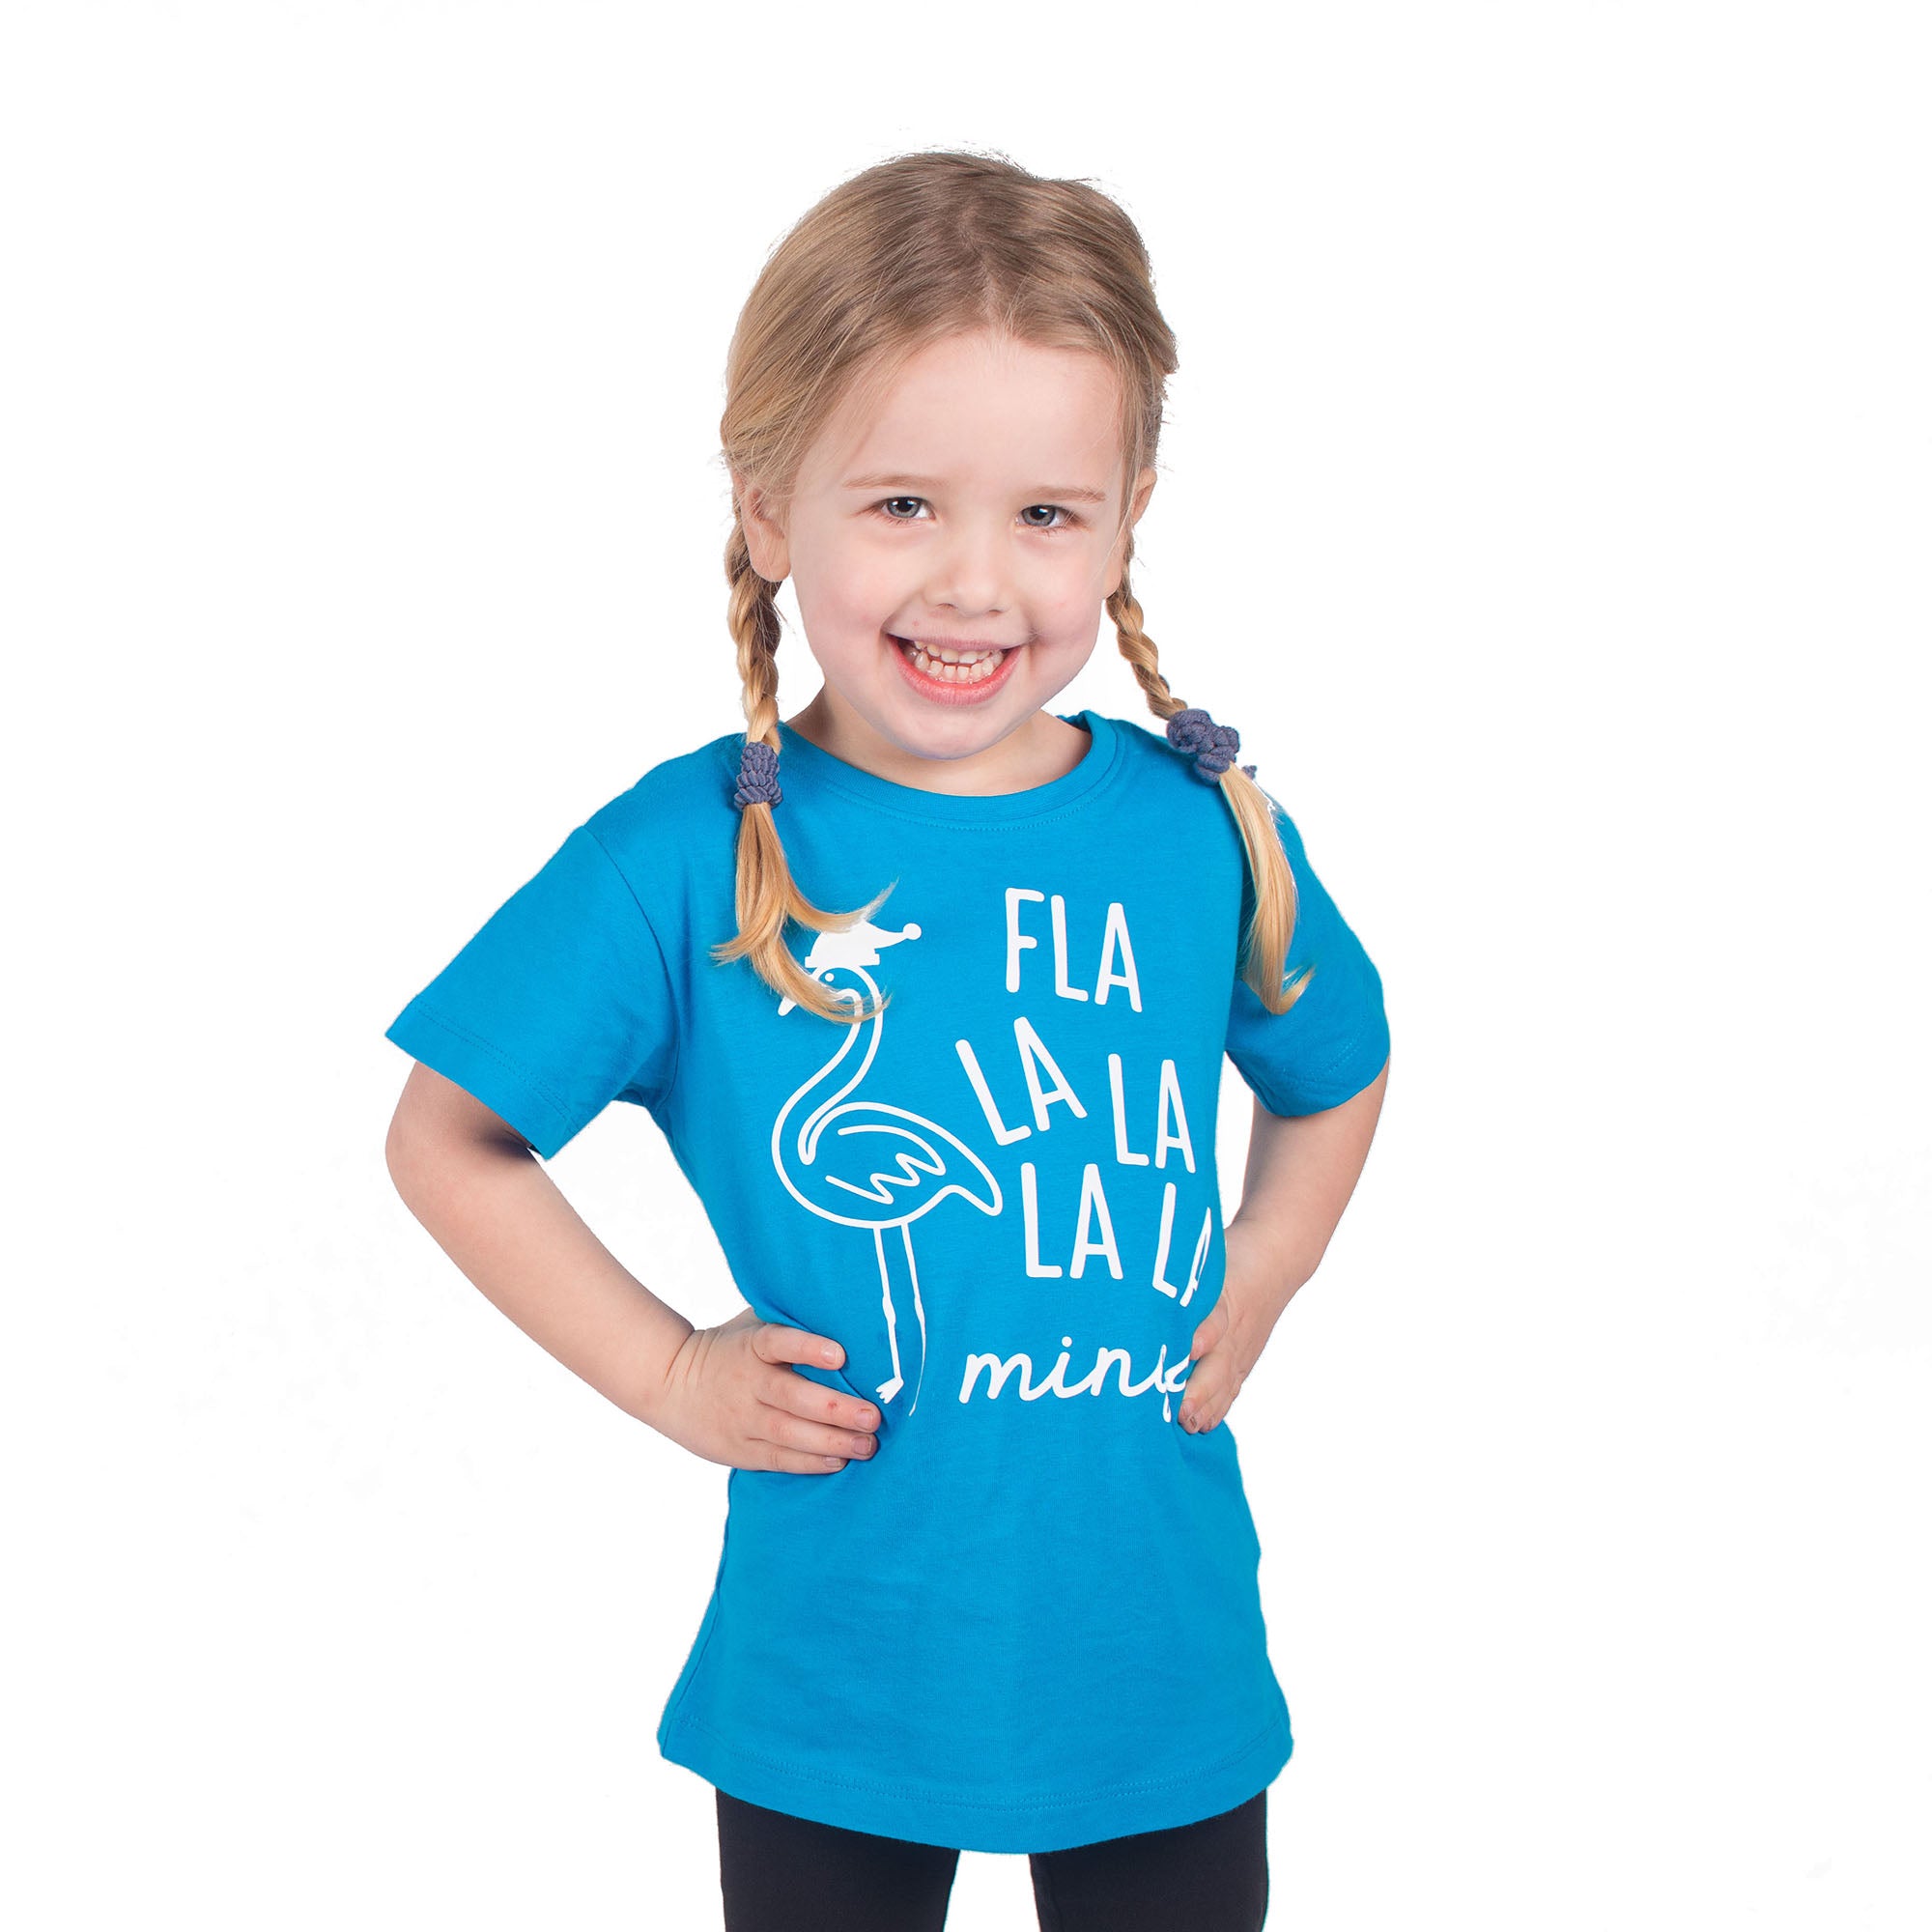 Smiling blonde girl with pigtails wearing aqua shirt with 'Fla la la la la mingo' print by KMLeon with hands to her sides.